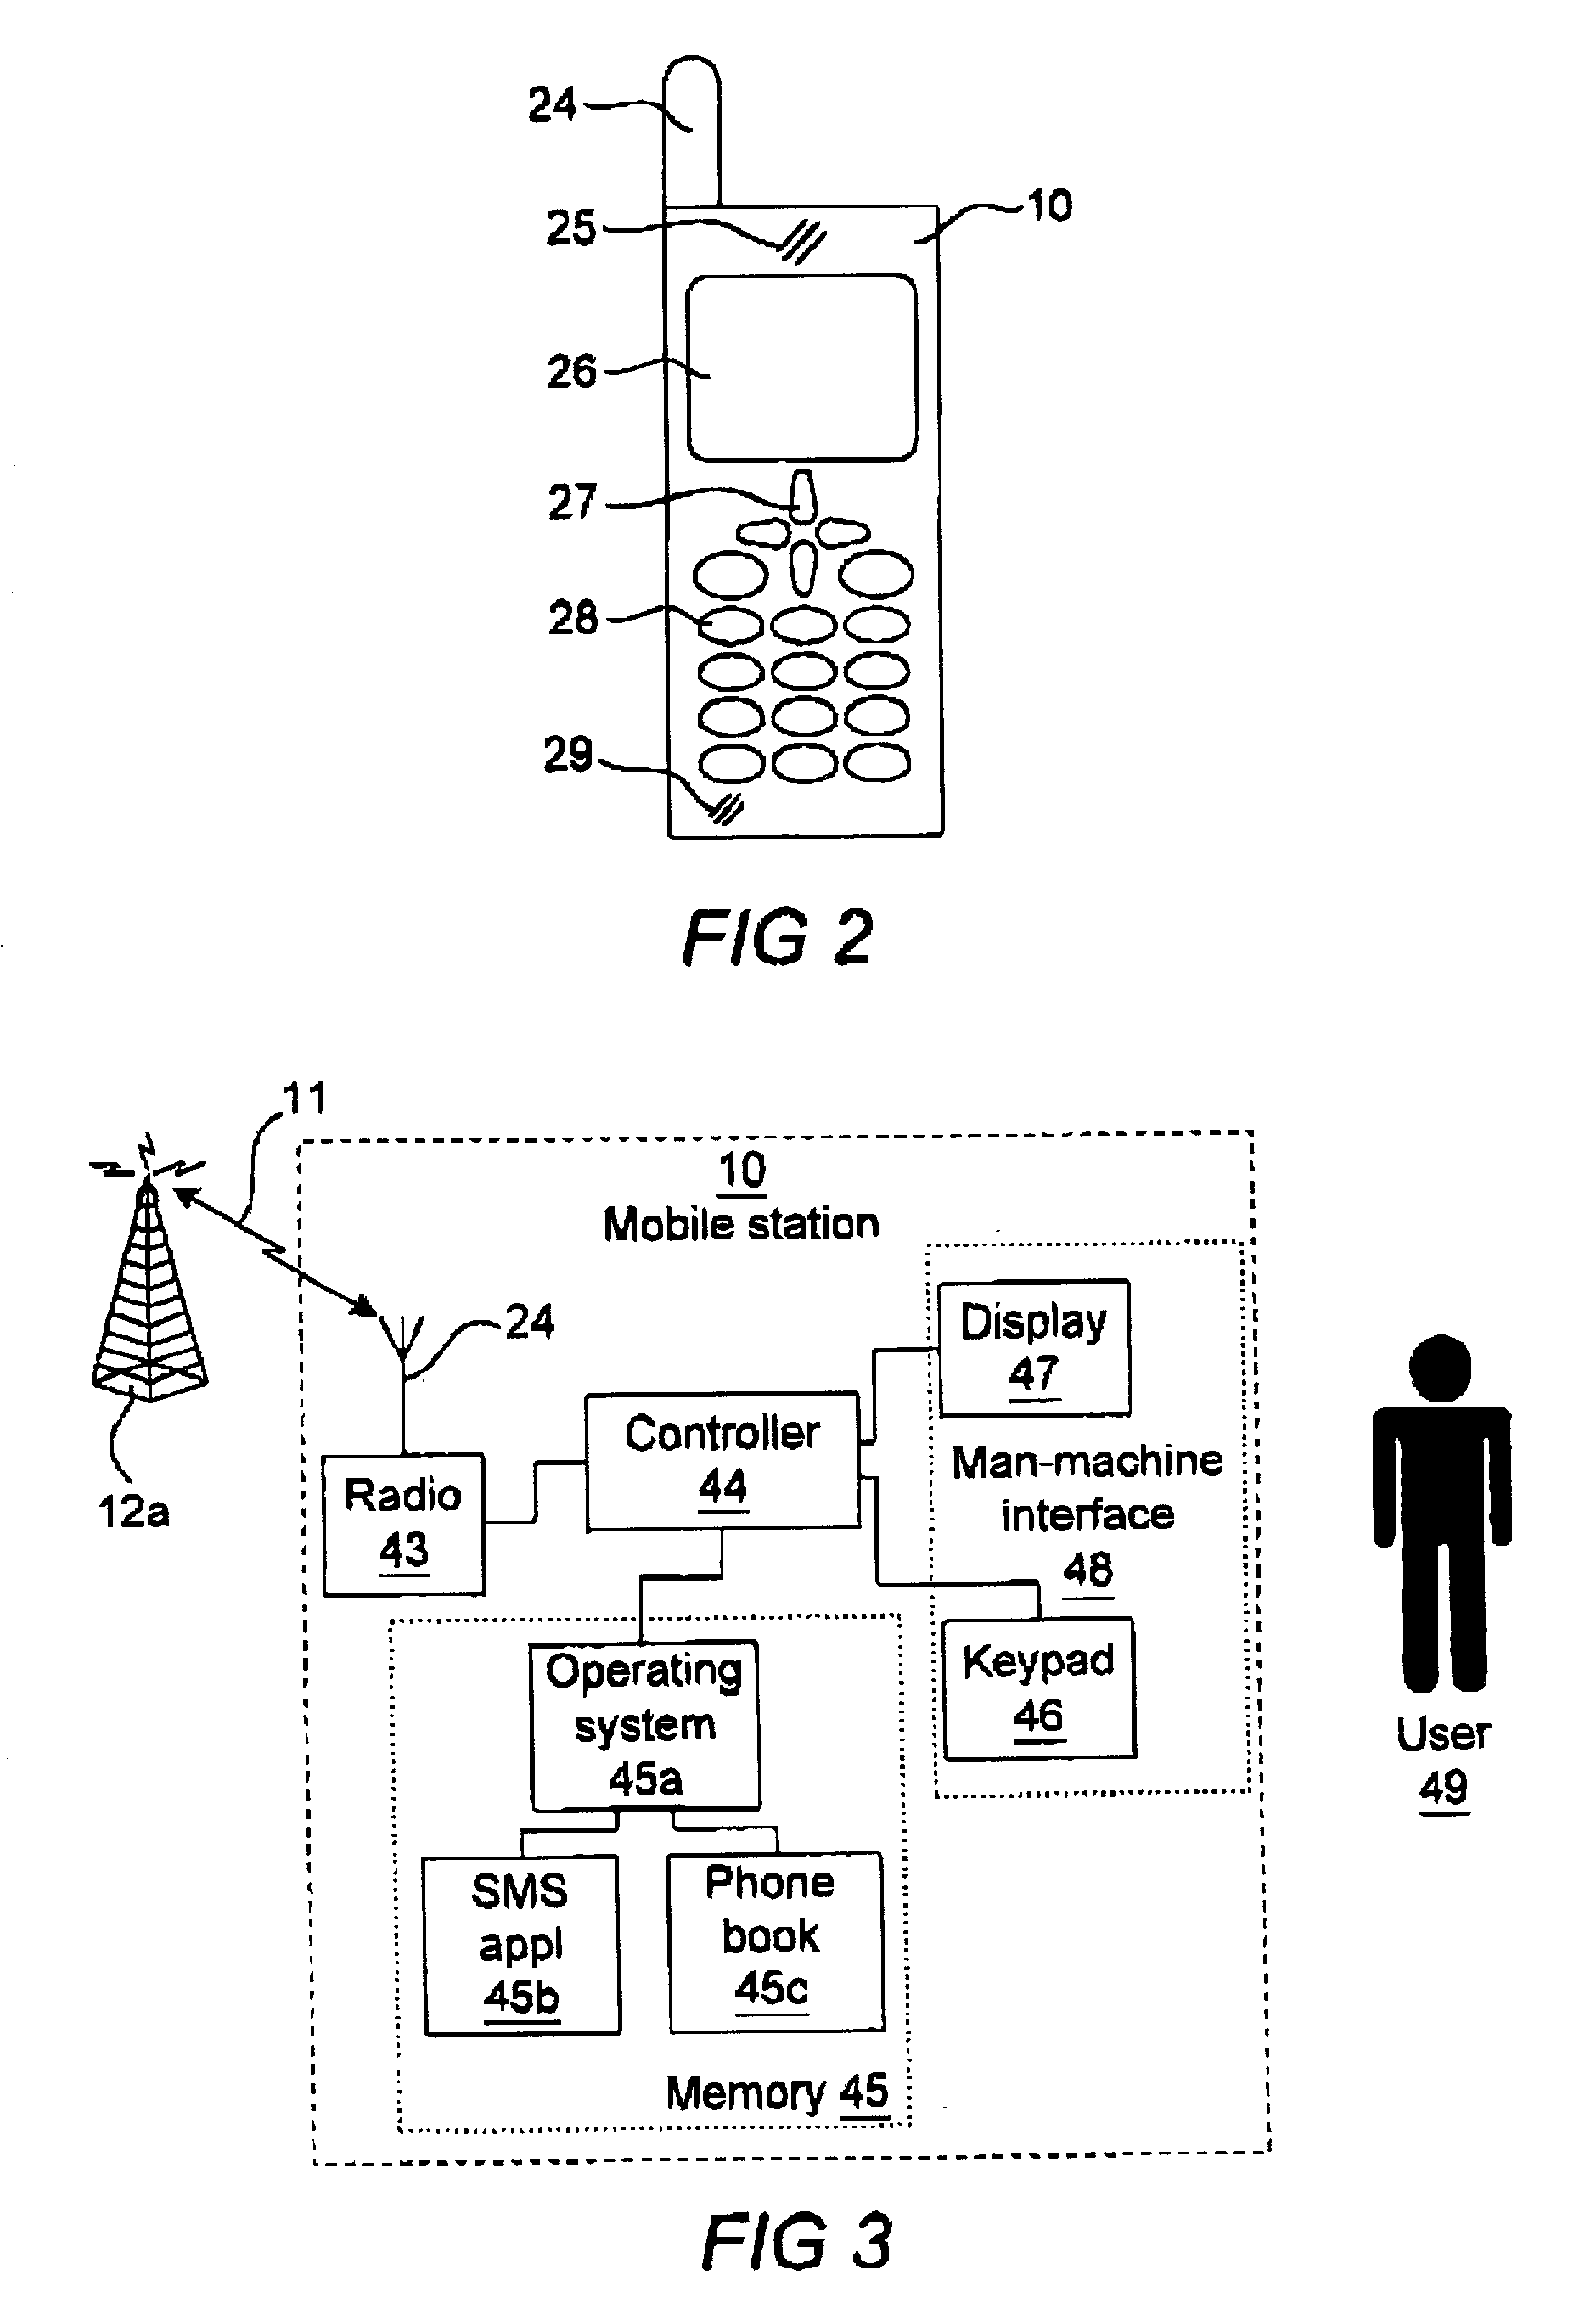 Apparatus and a method for providing operational status information between subscribers in a telecommunications network